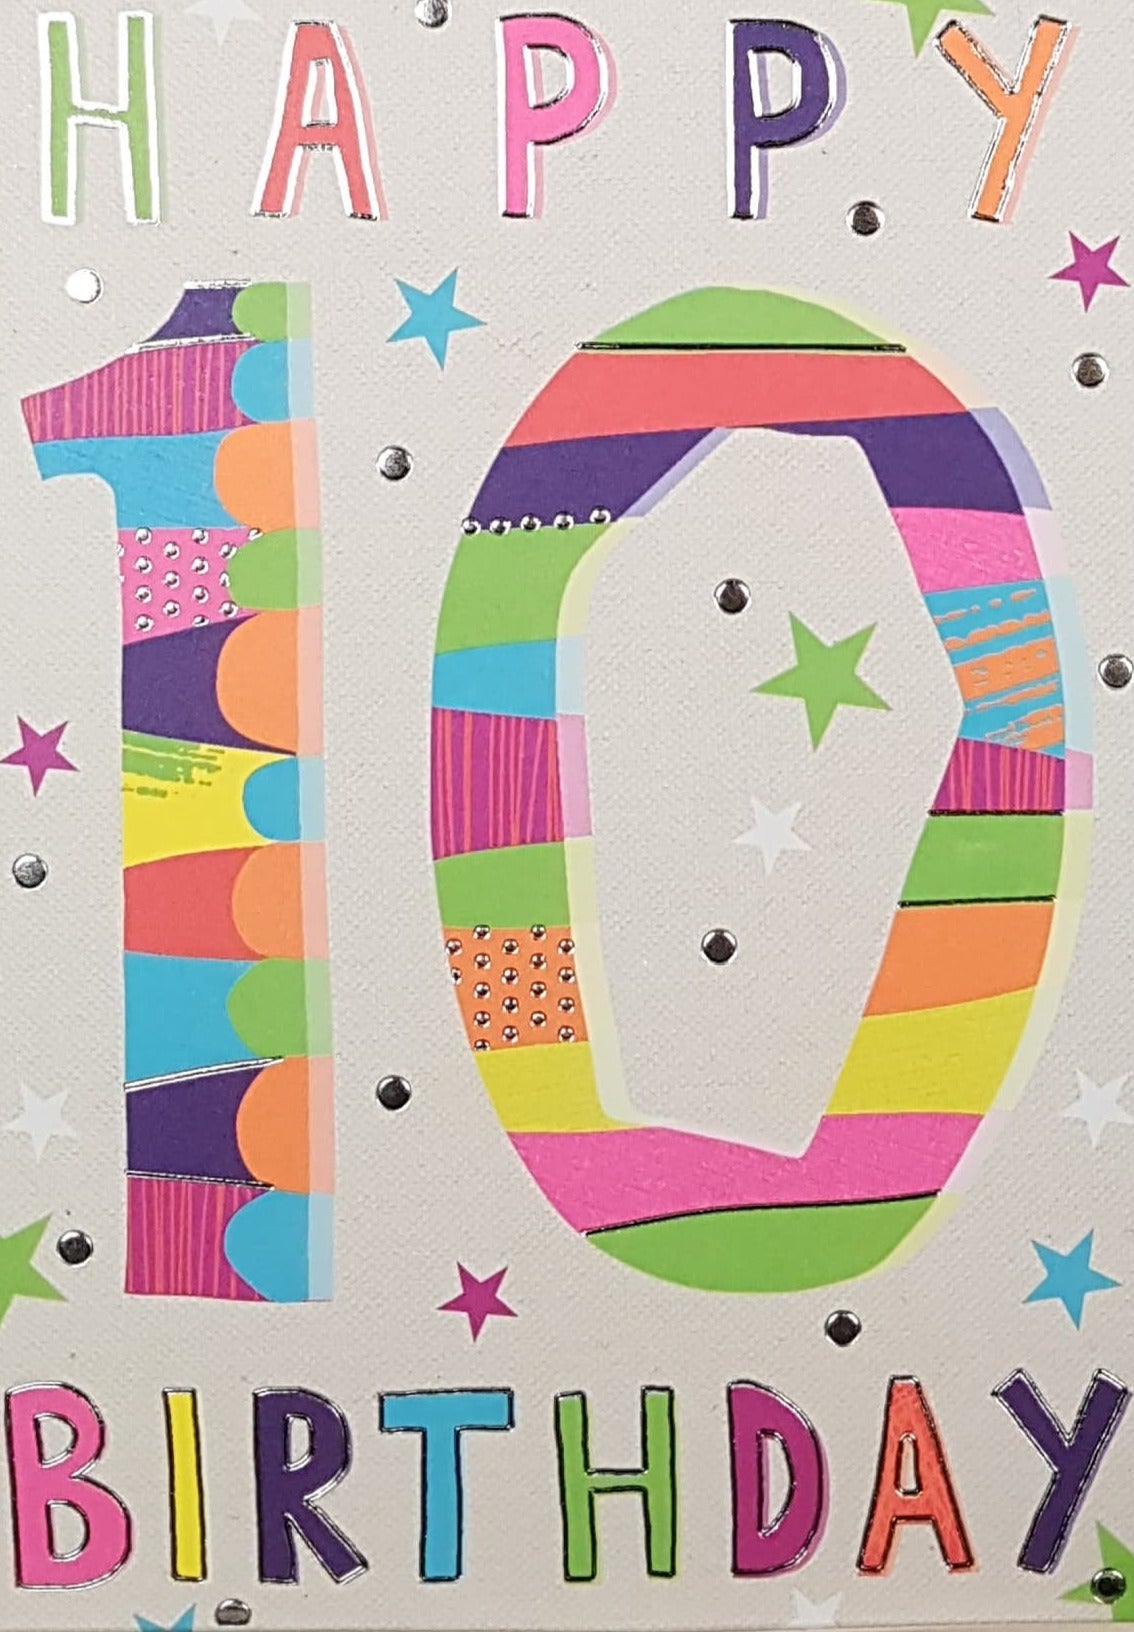 Age 10 Birthday Card - Colourful Patterns On Digits & Font